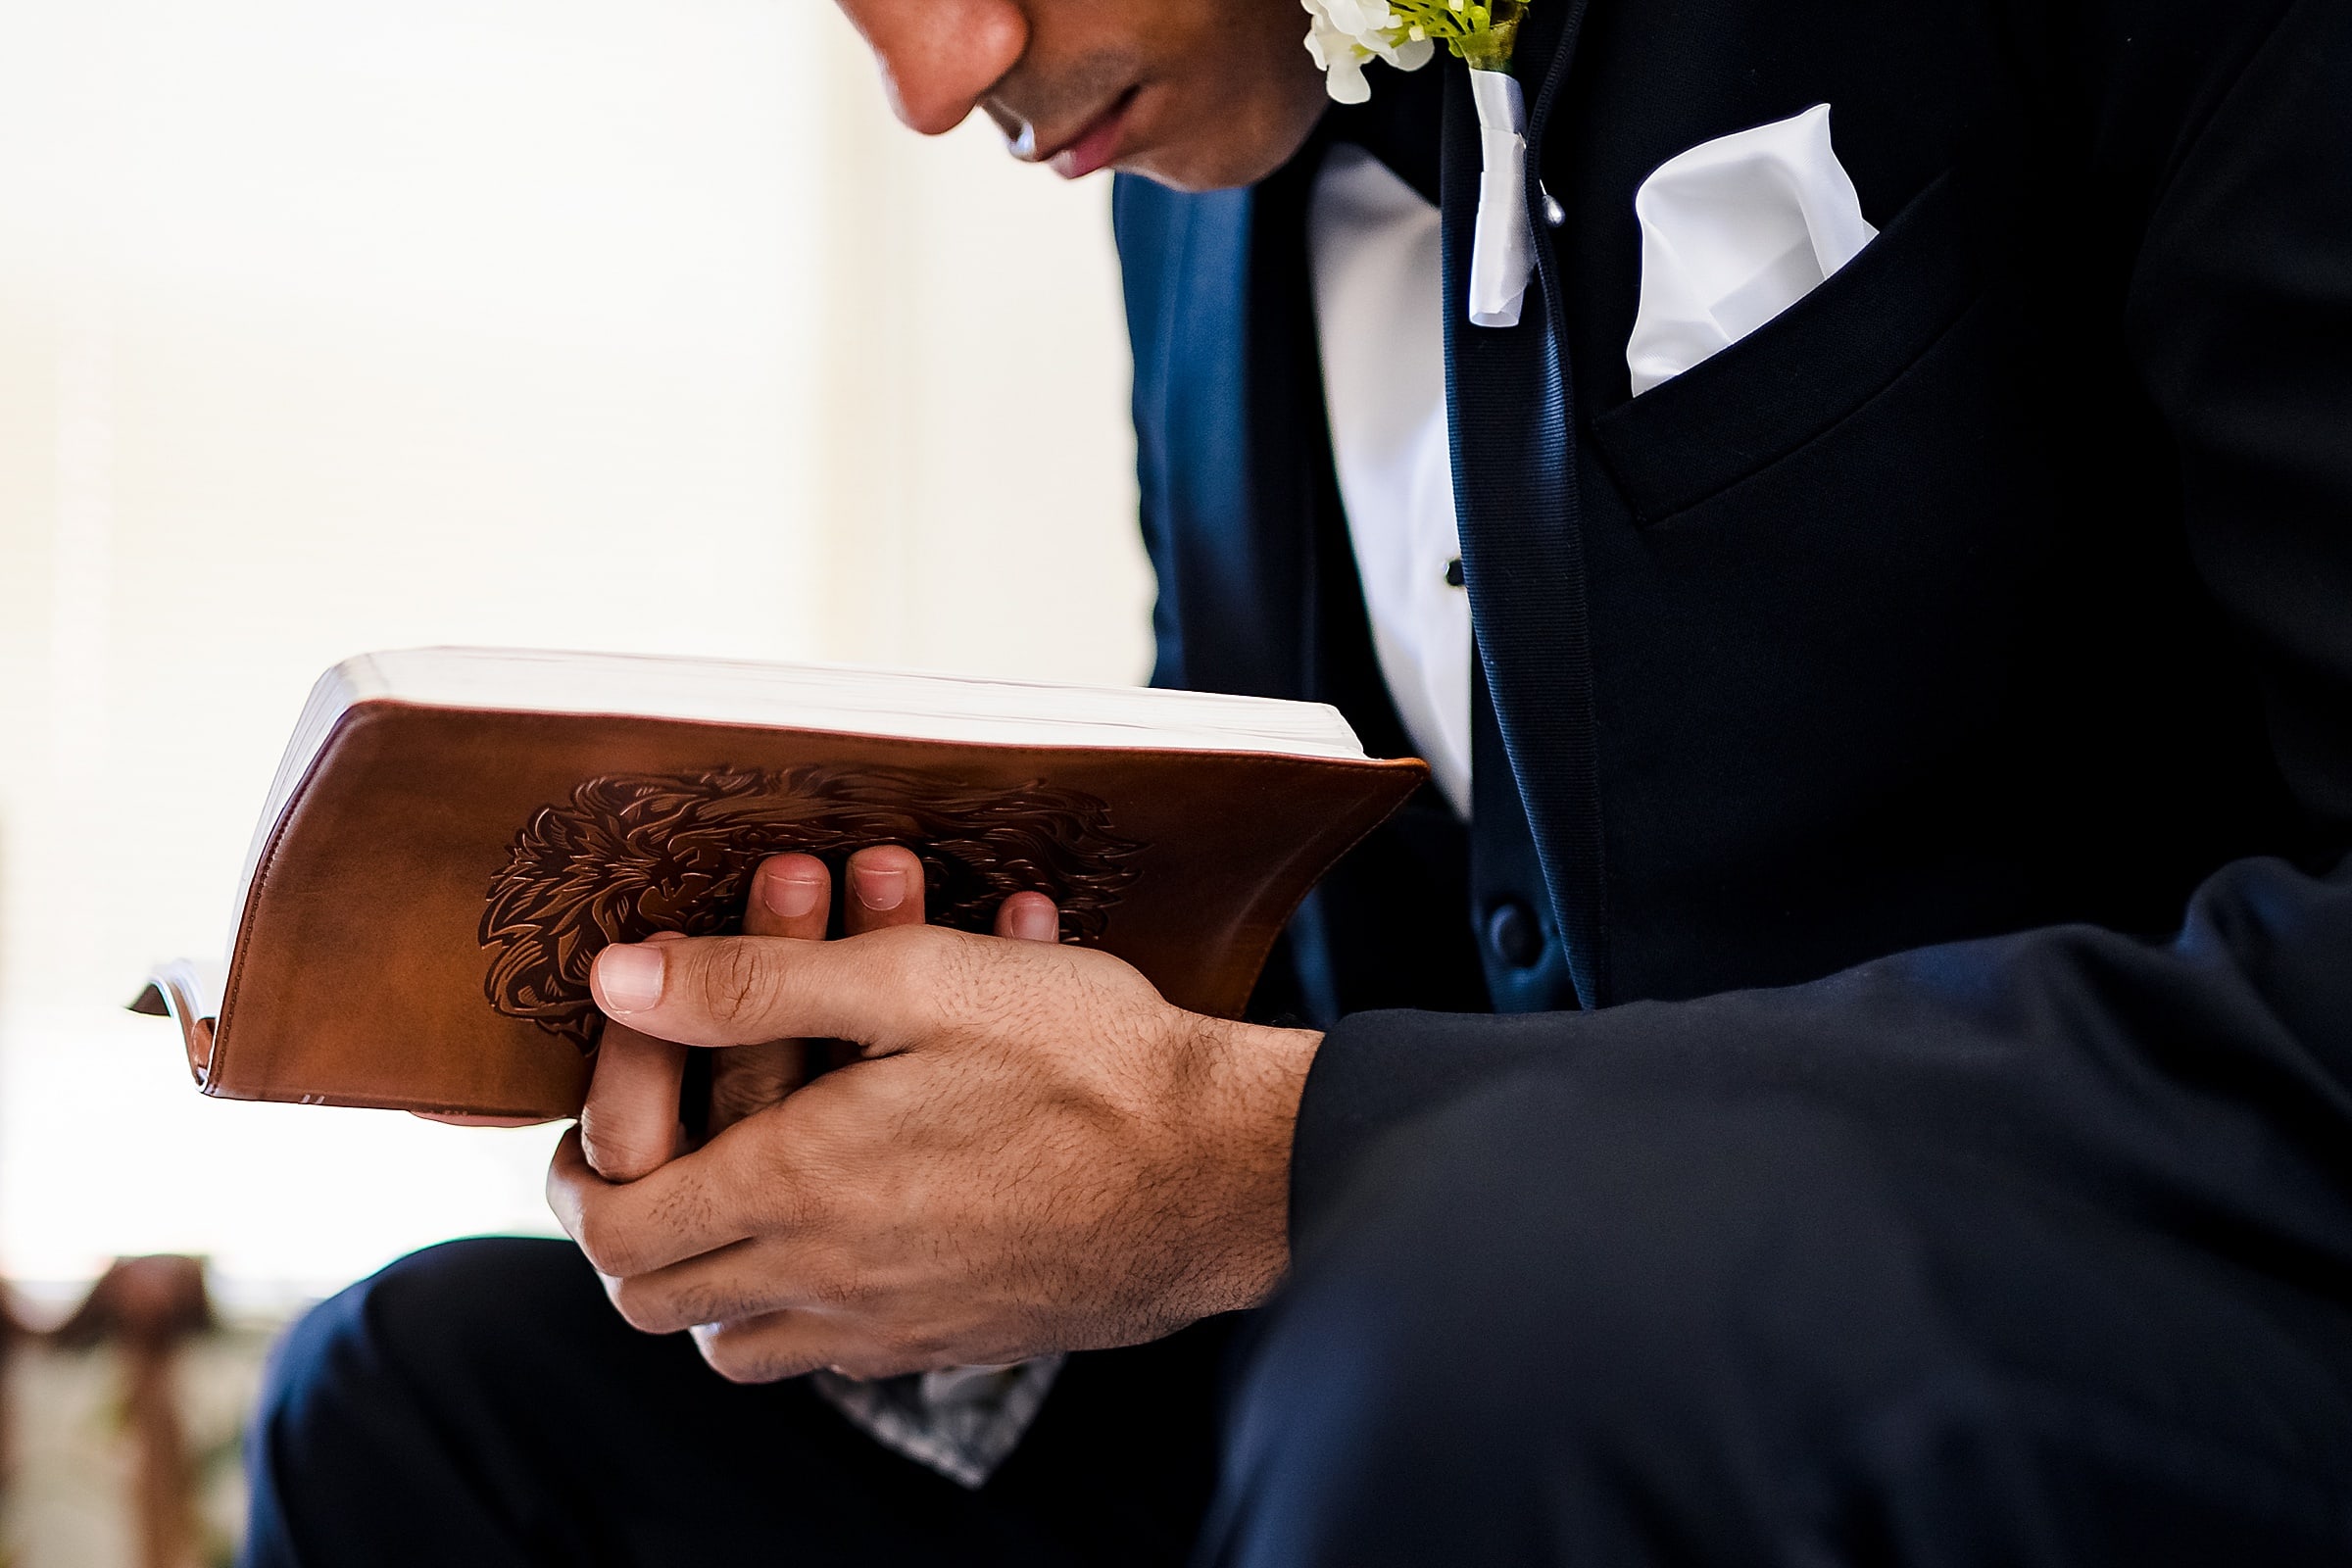 Groom takes a quiet moment for prayer before the ceremony | photos by Kivus & Camera